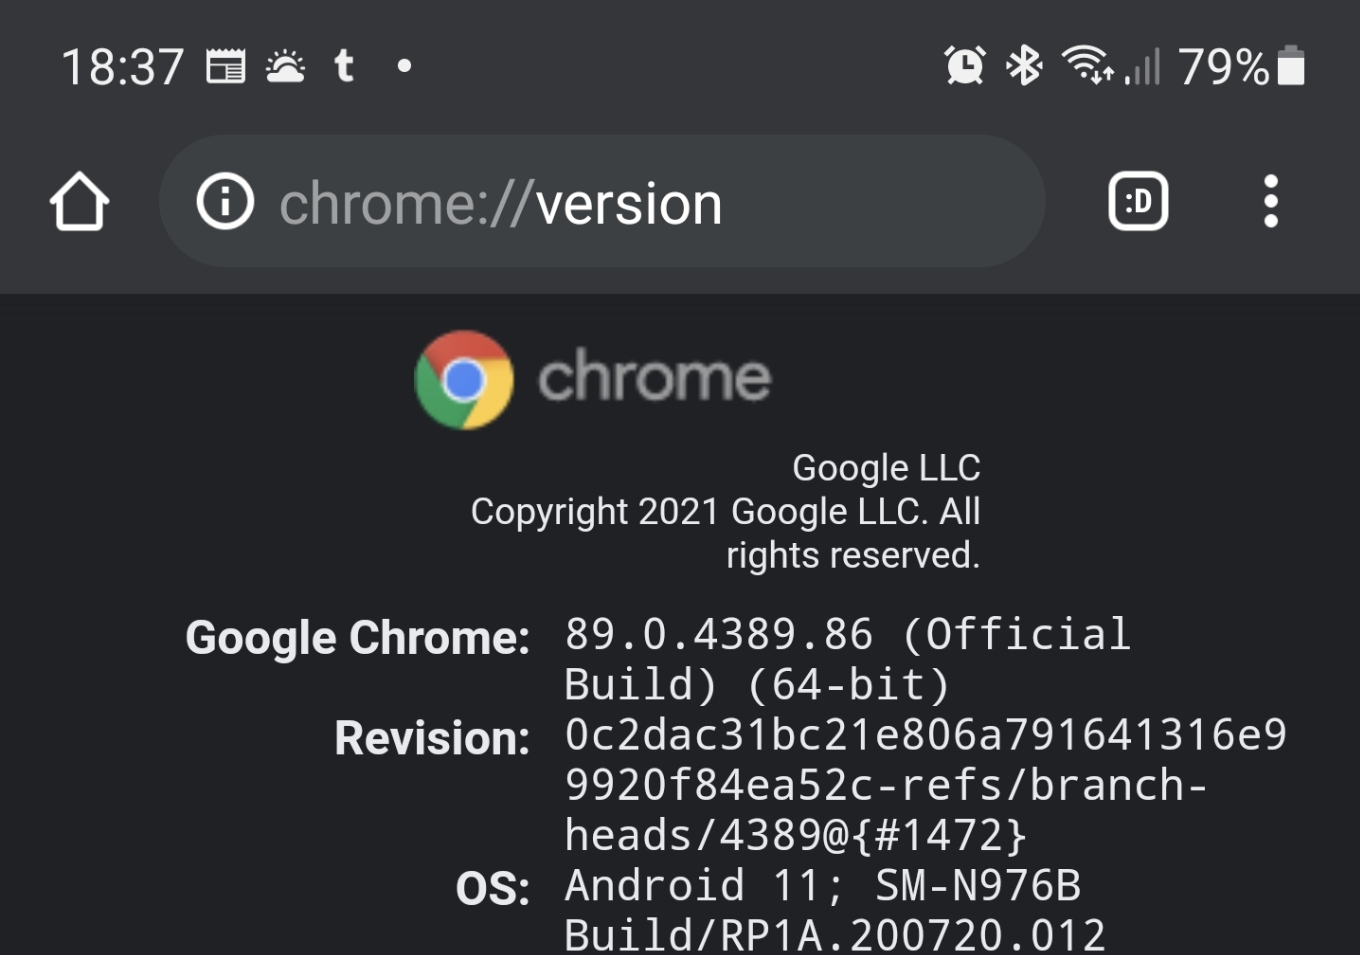 Google finally pushing out 64bit Chrome for Android, here’s how to see if you have it